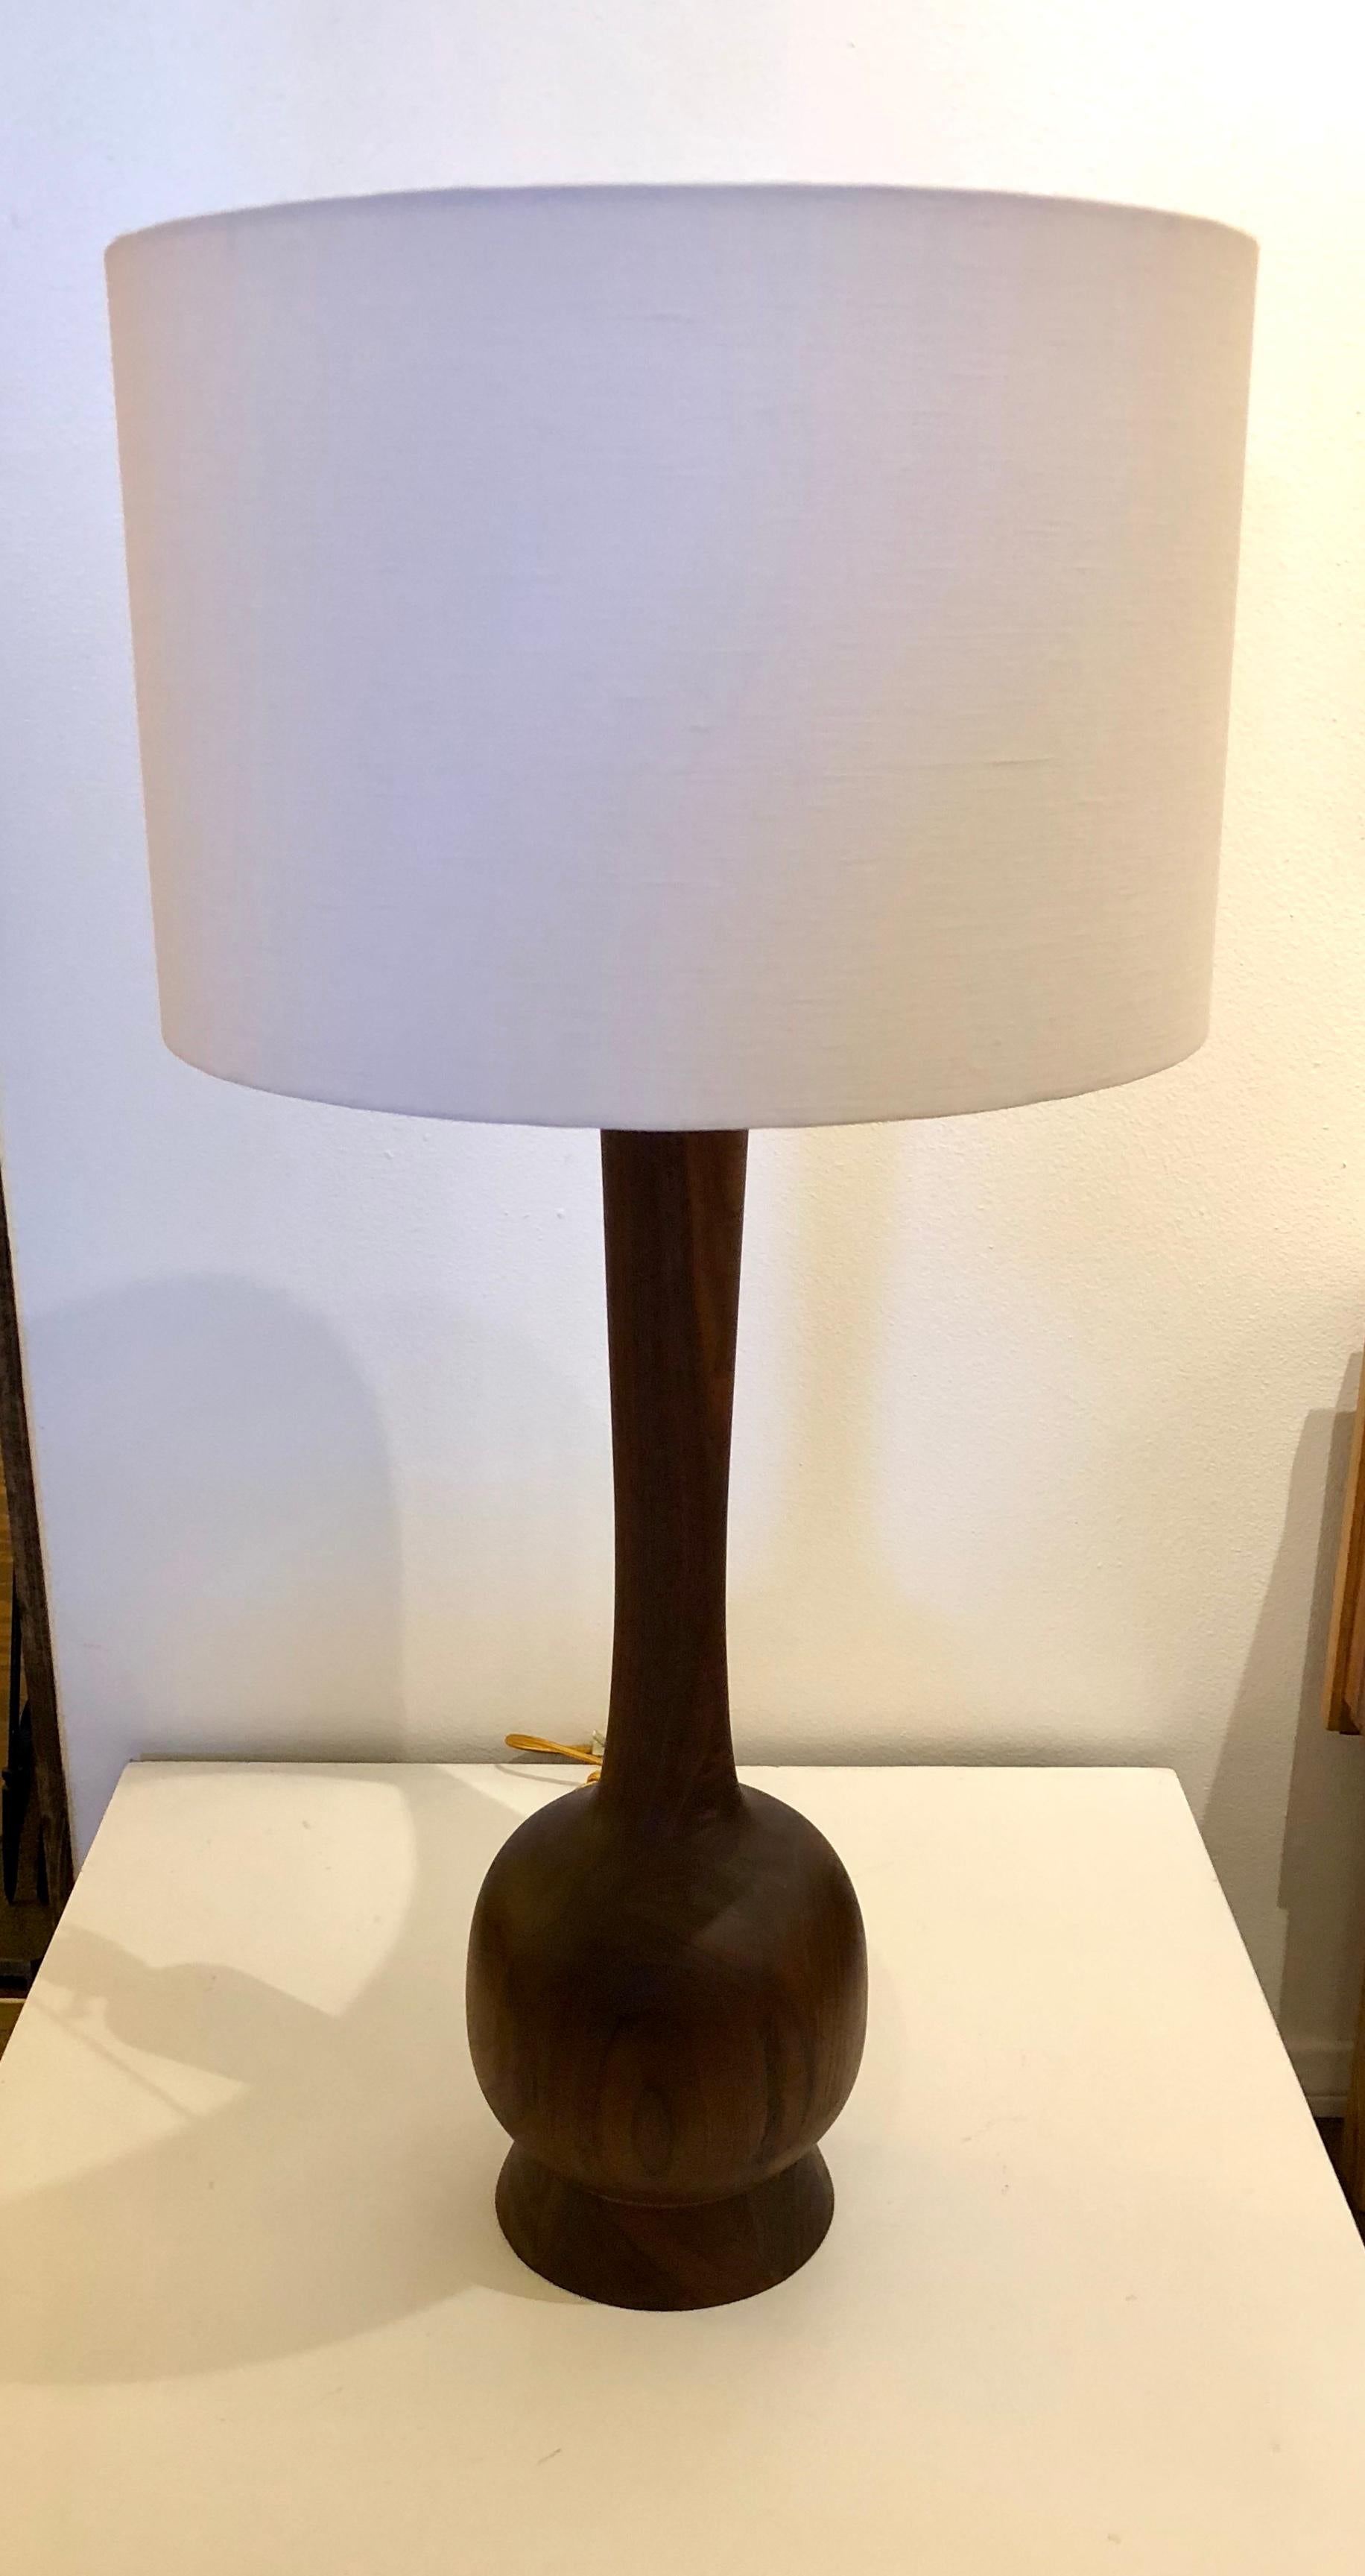 Massive solid walnut pair of tall table lamps, completely restored. This lamps have been refinished, rewired and a pair of new white linen shades, with polished brass fittings and new sockets. Each lamp is 37 1/2